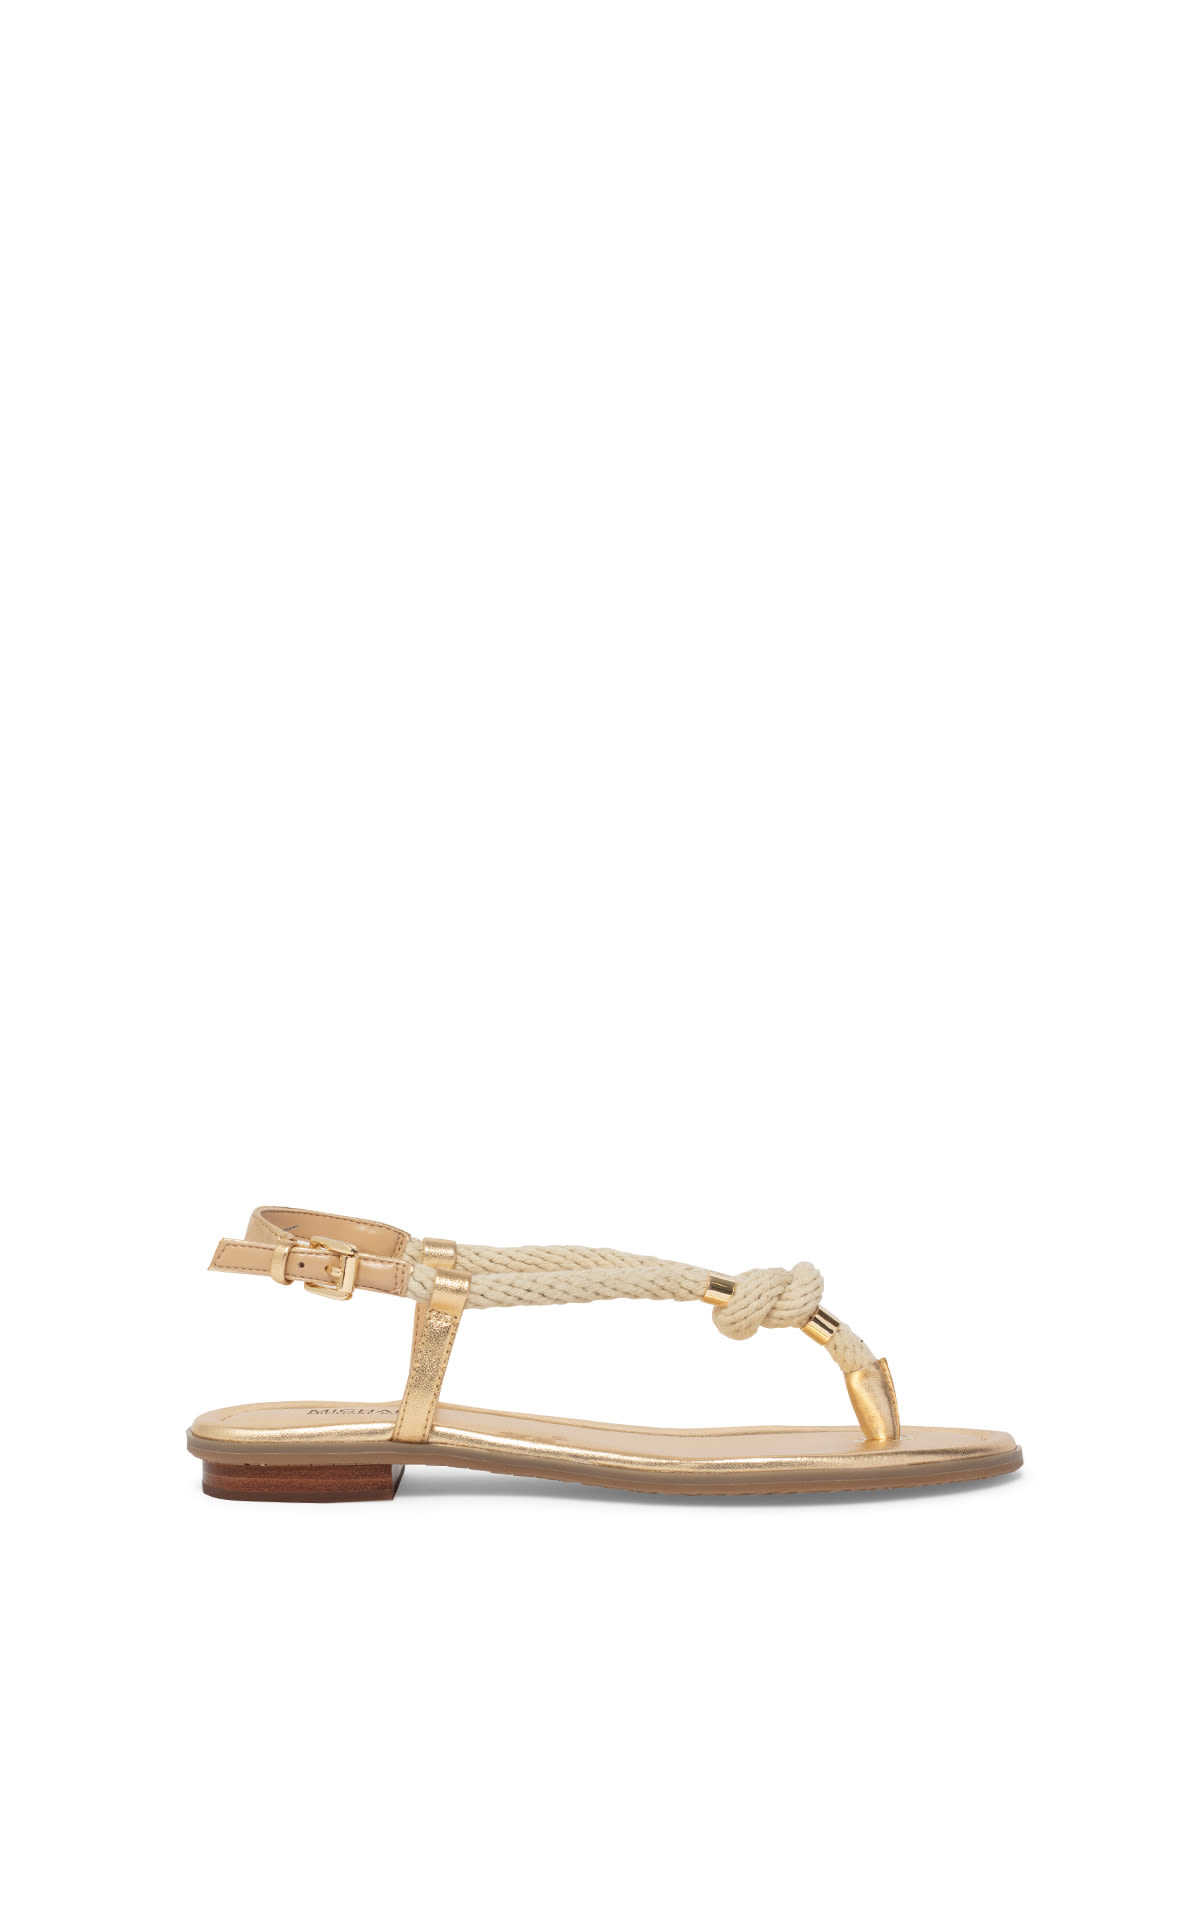 Michael Kors Holly sandals in gold*